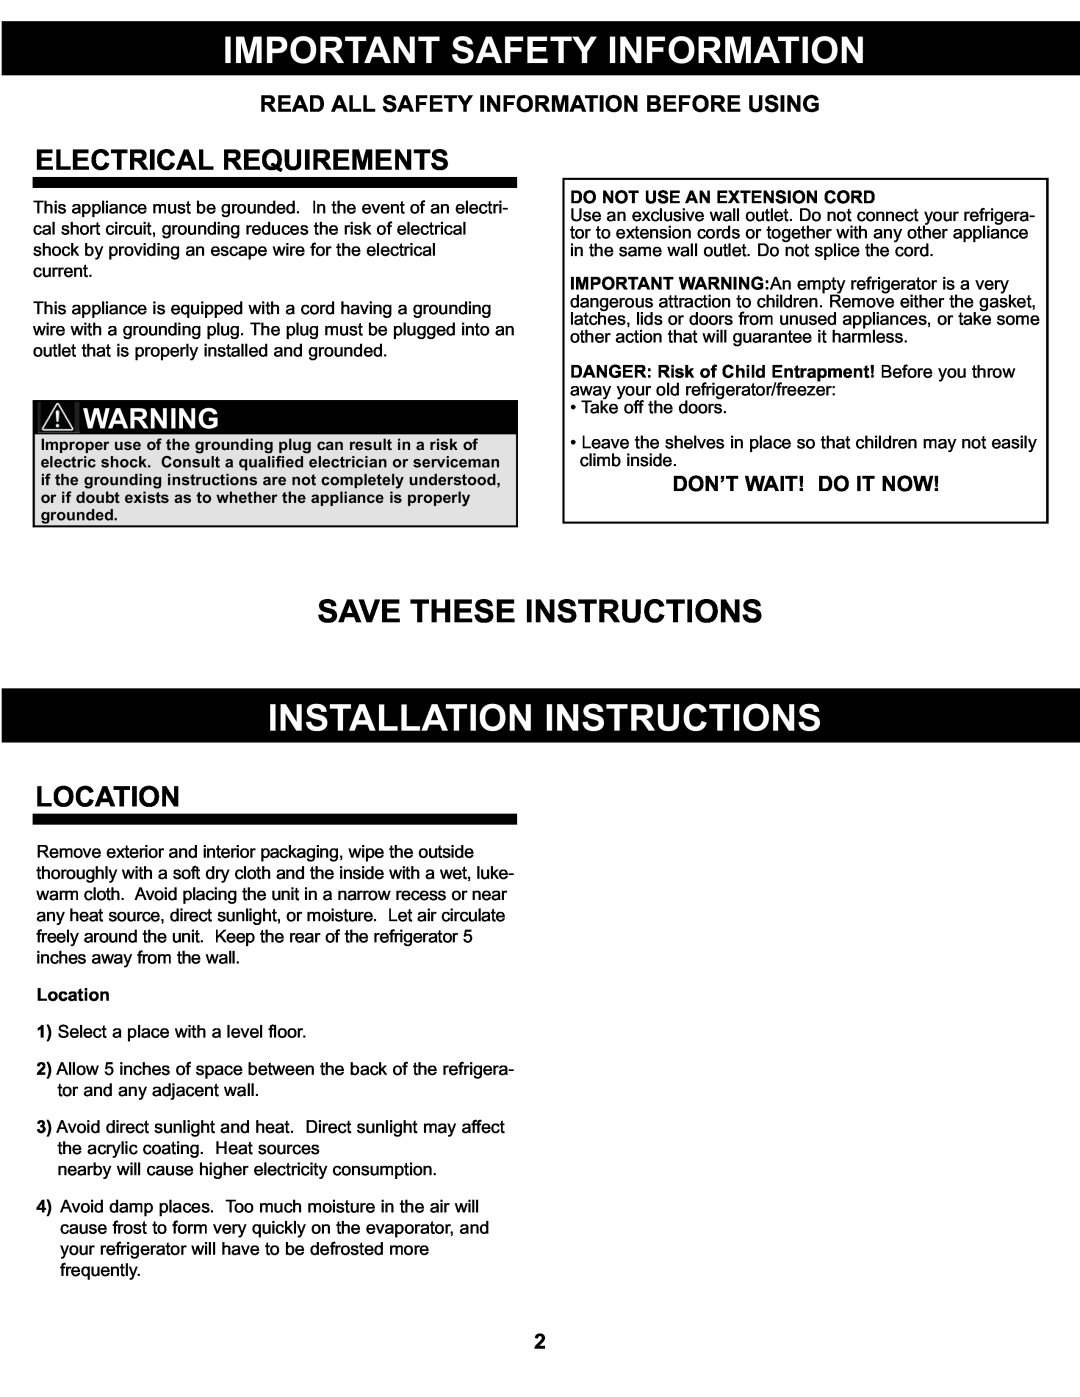 Danby DCR122BSLDD manual Important Safety Information, Installation Instructions, Save These Instructions, Location 